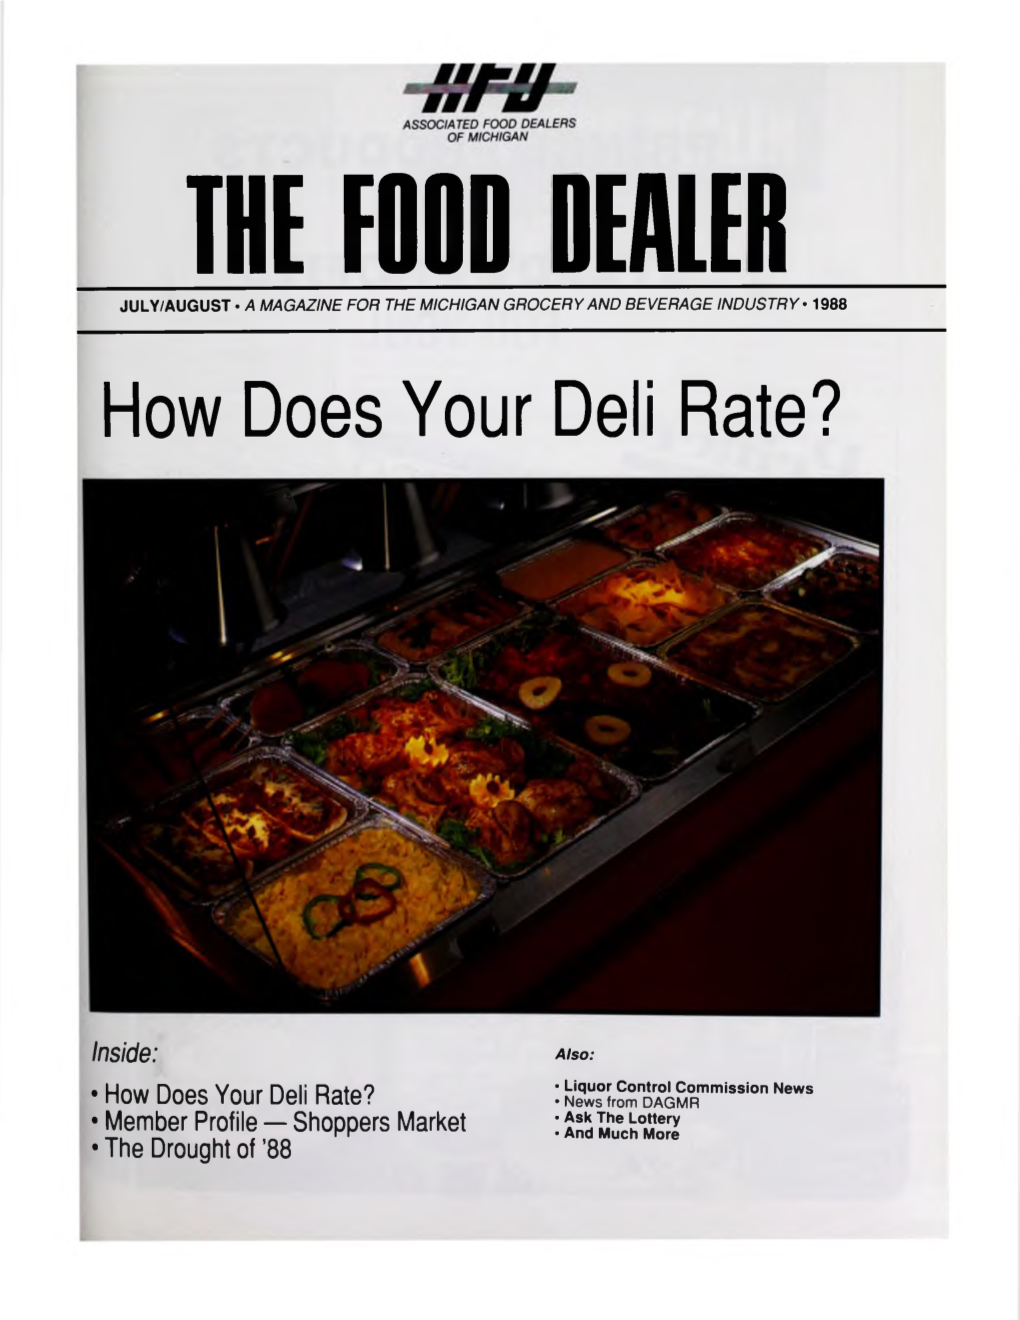 How Does Your Deli Rate?